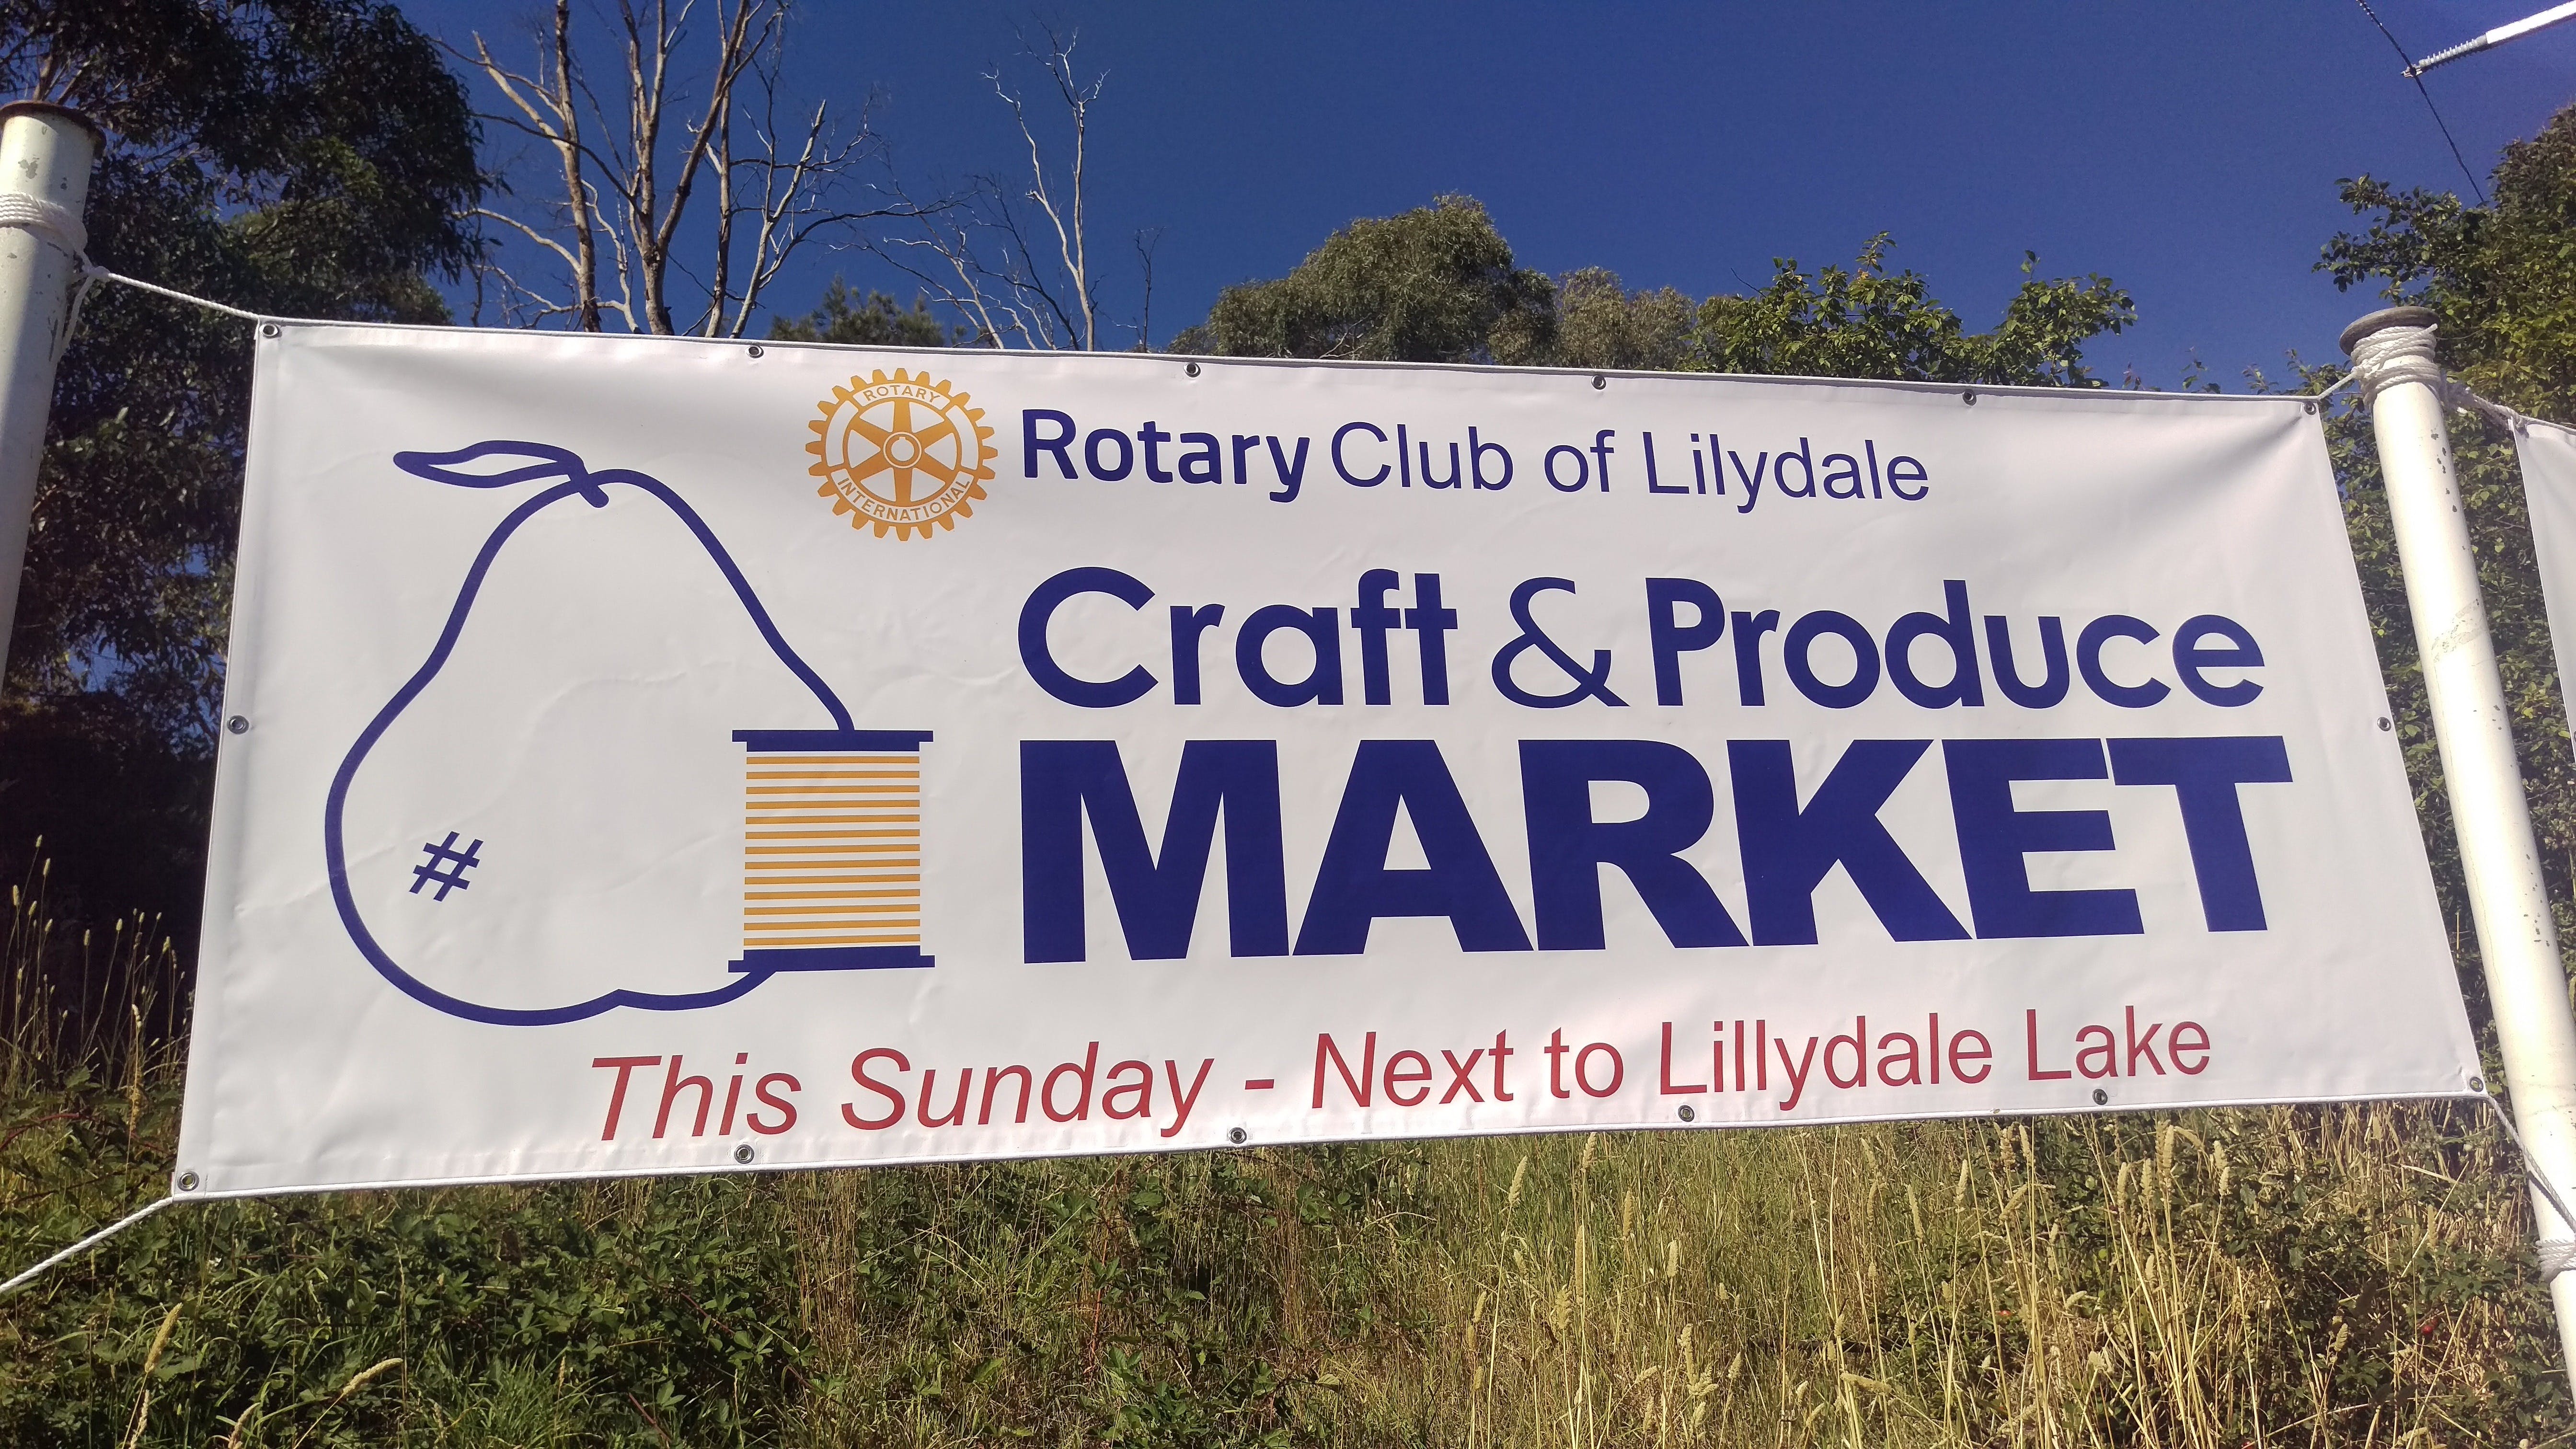 Rotary Club of Lilydale Craft and Produce Market - Pubs and Clubs